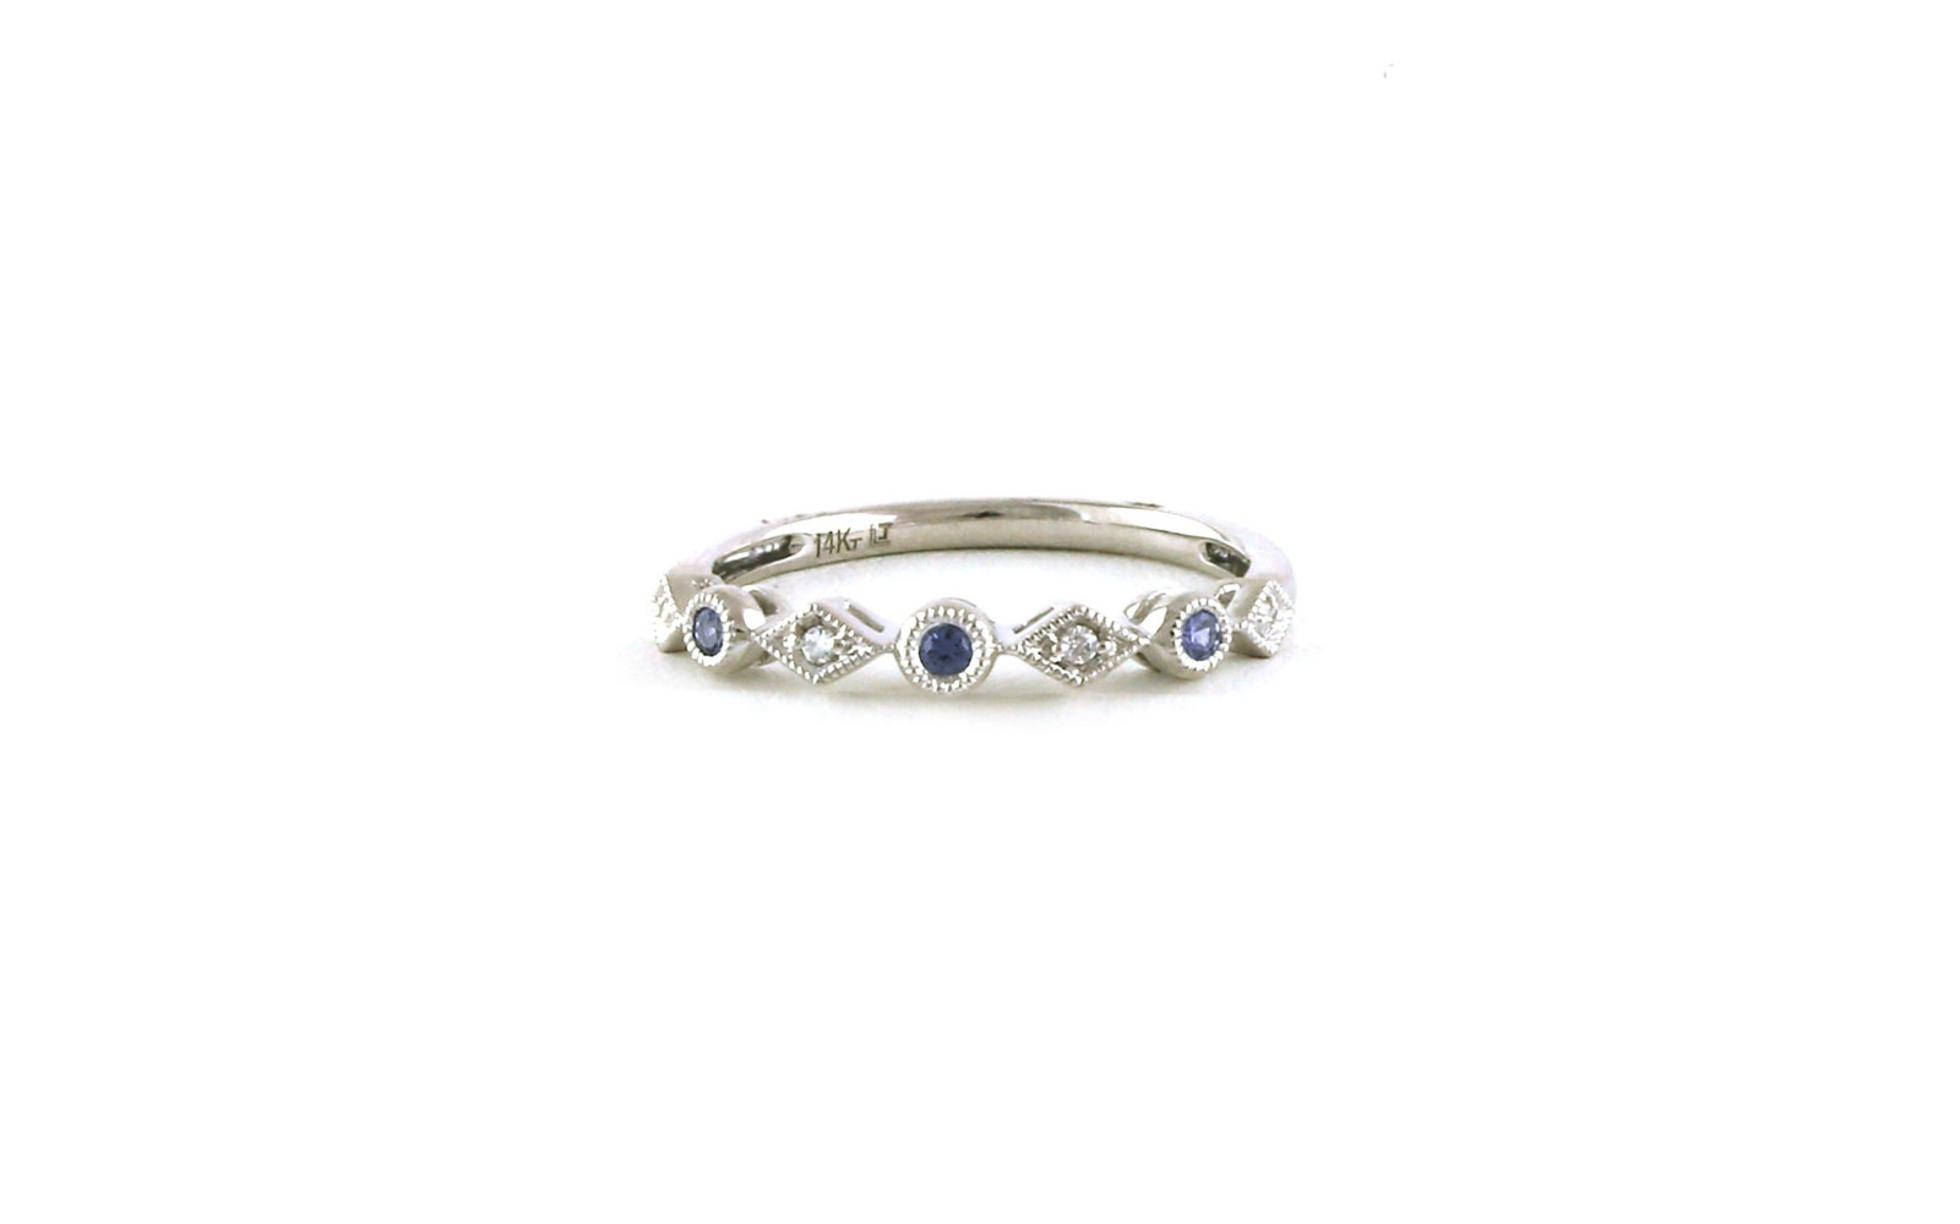 Alternating Diamond and Montana Yogo Sapphire Wedding Band with Milgrain Details in White Gold (0.11cts TWT)